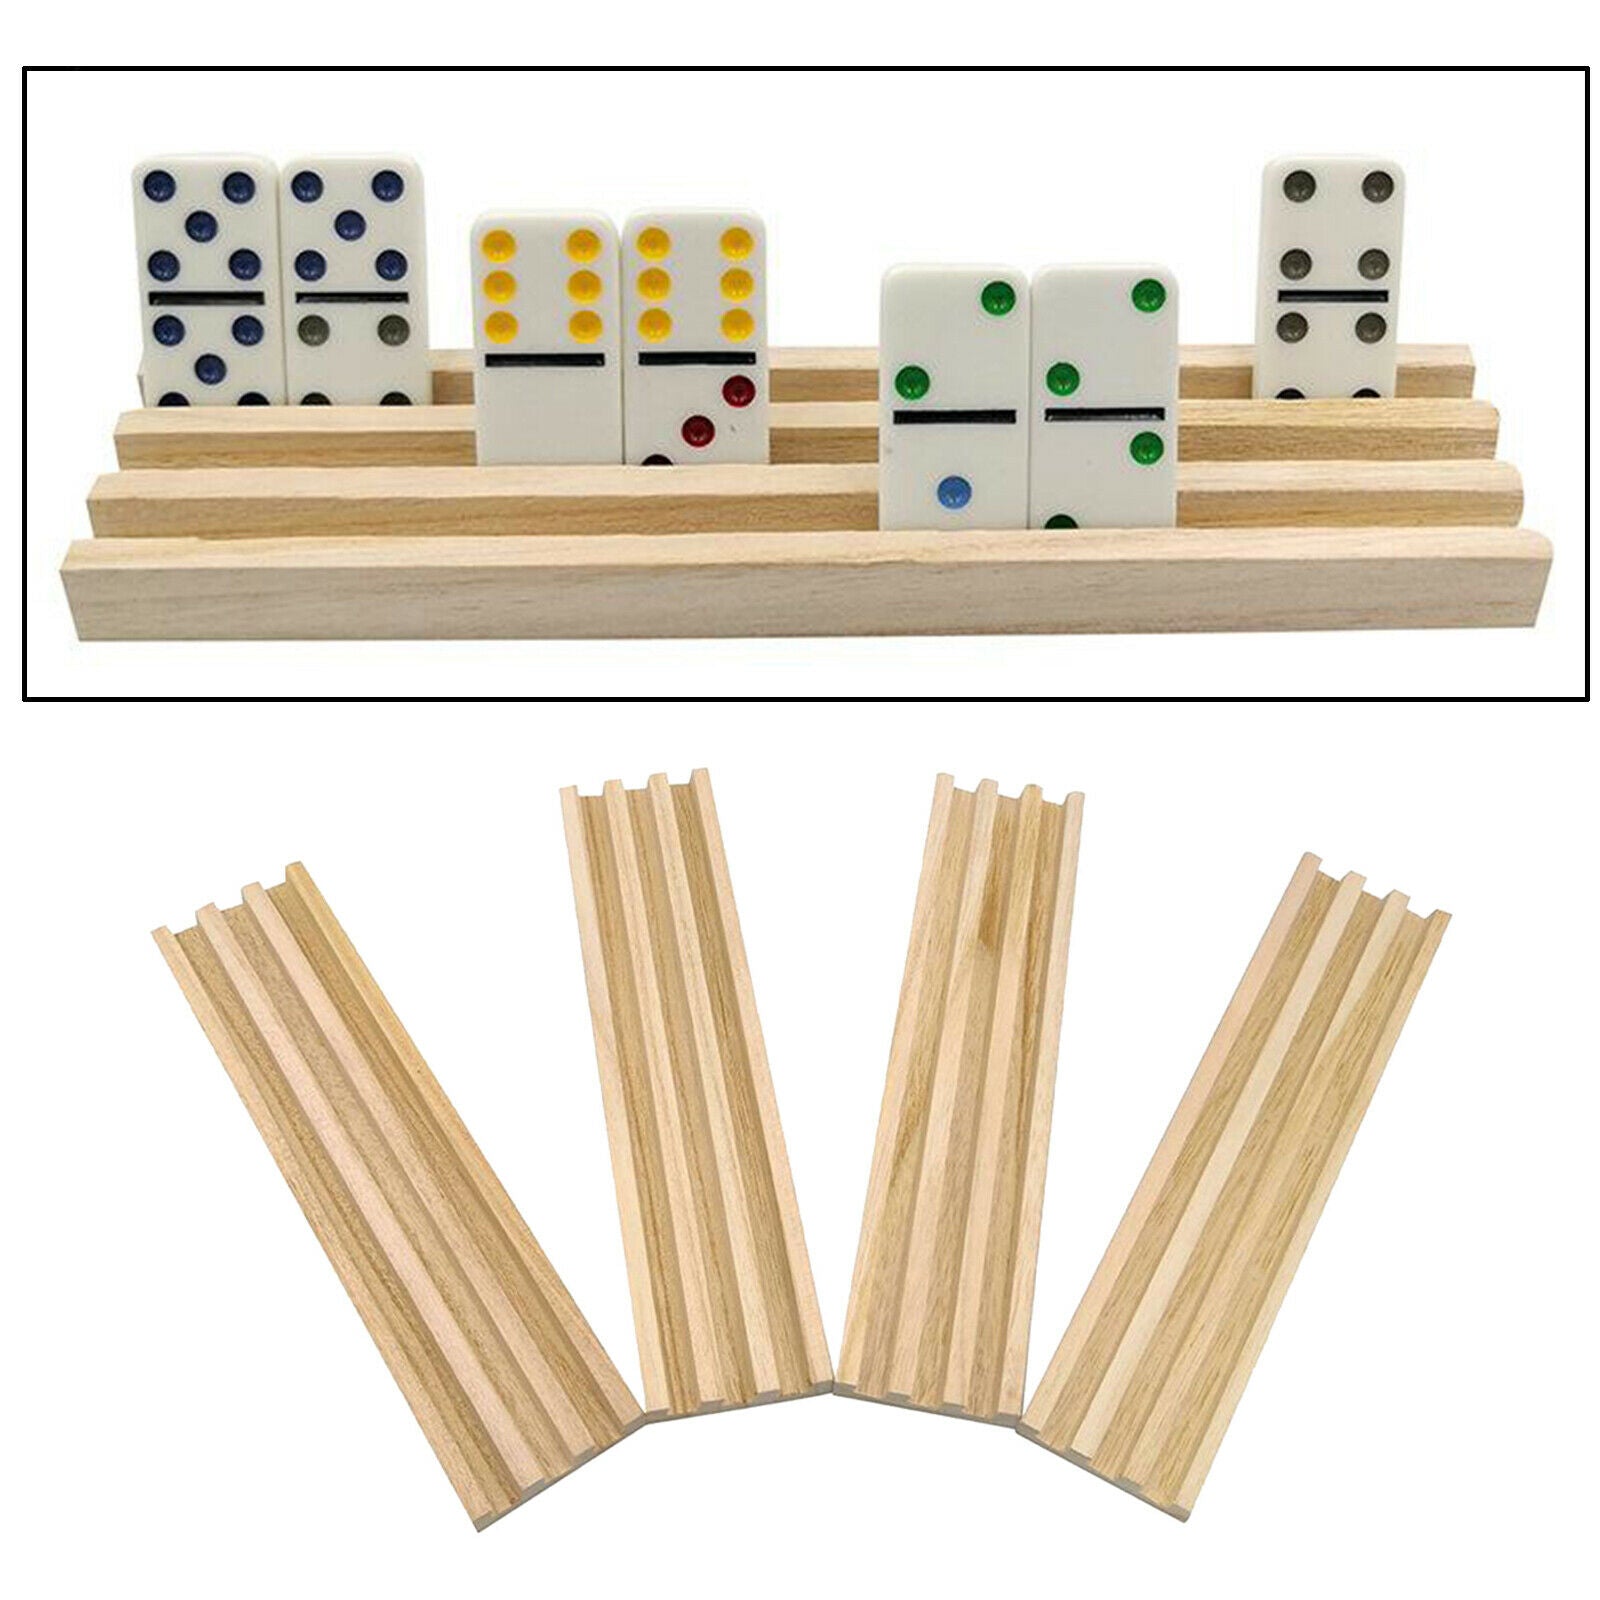 Set of 4 Solid Wooden Domino Trays Racks Stand for Mahjong Chicken Foot